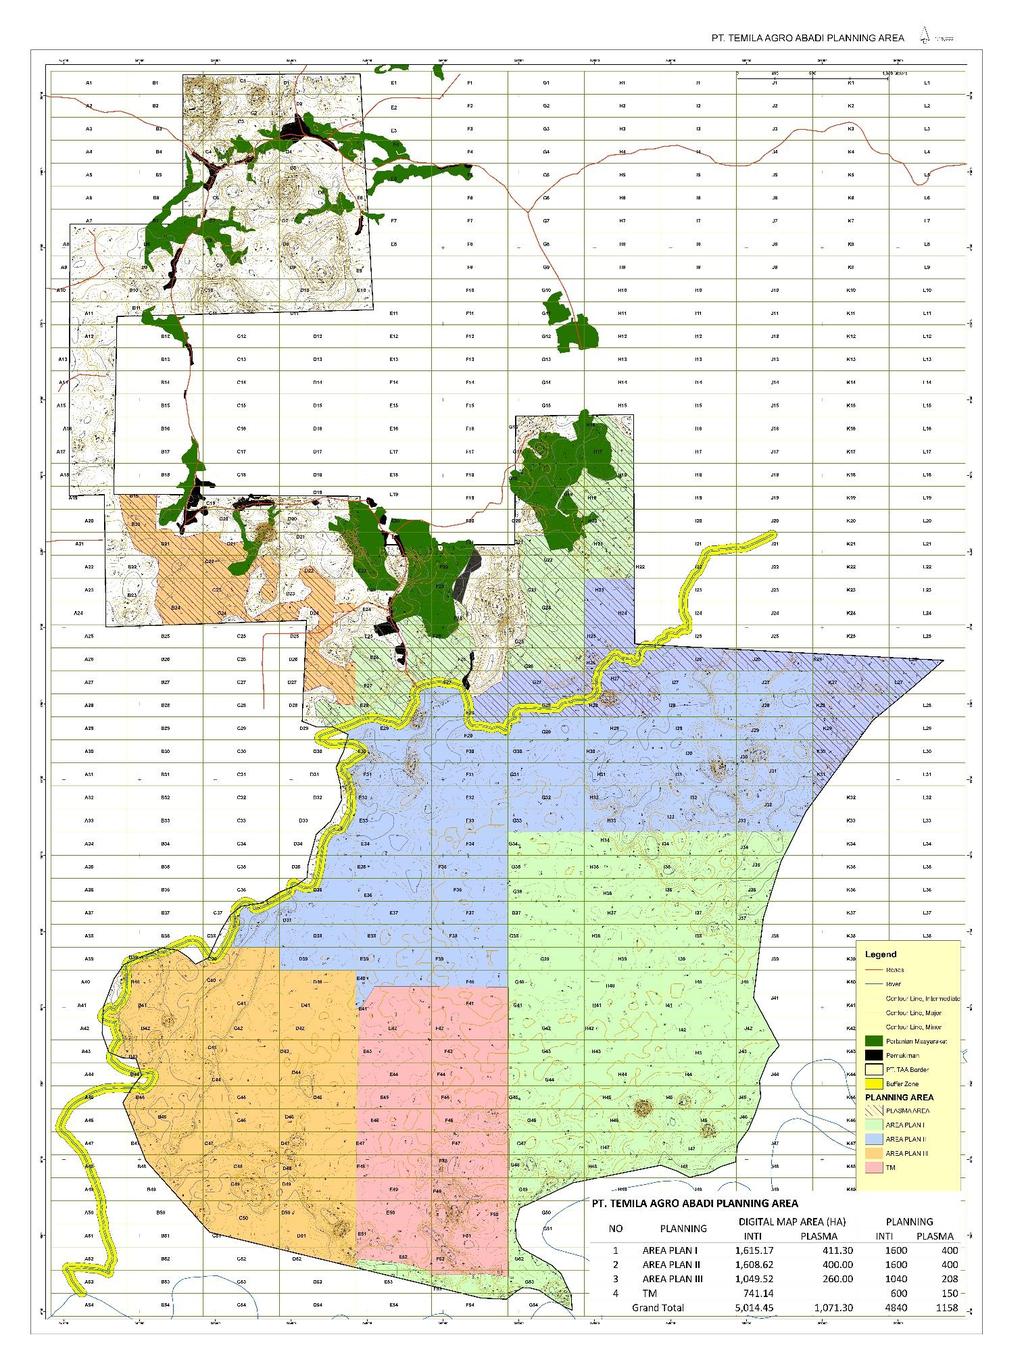 Figure 5. Land Cover Map of PT.